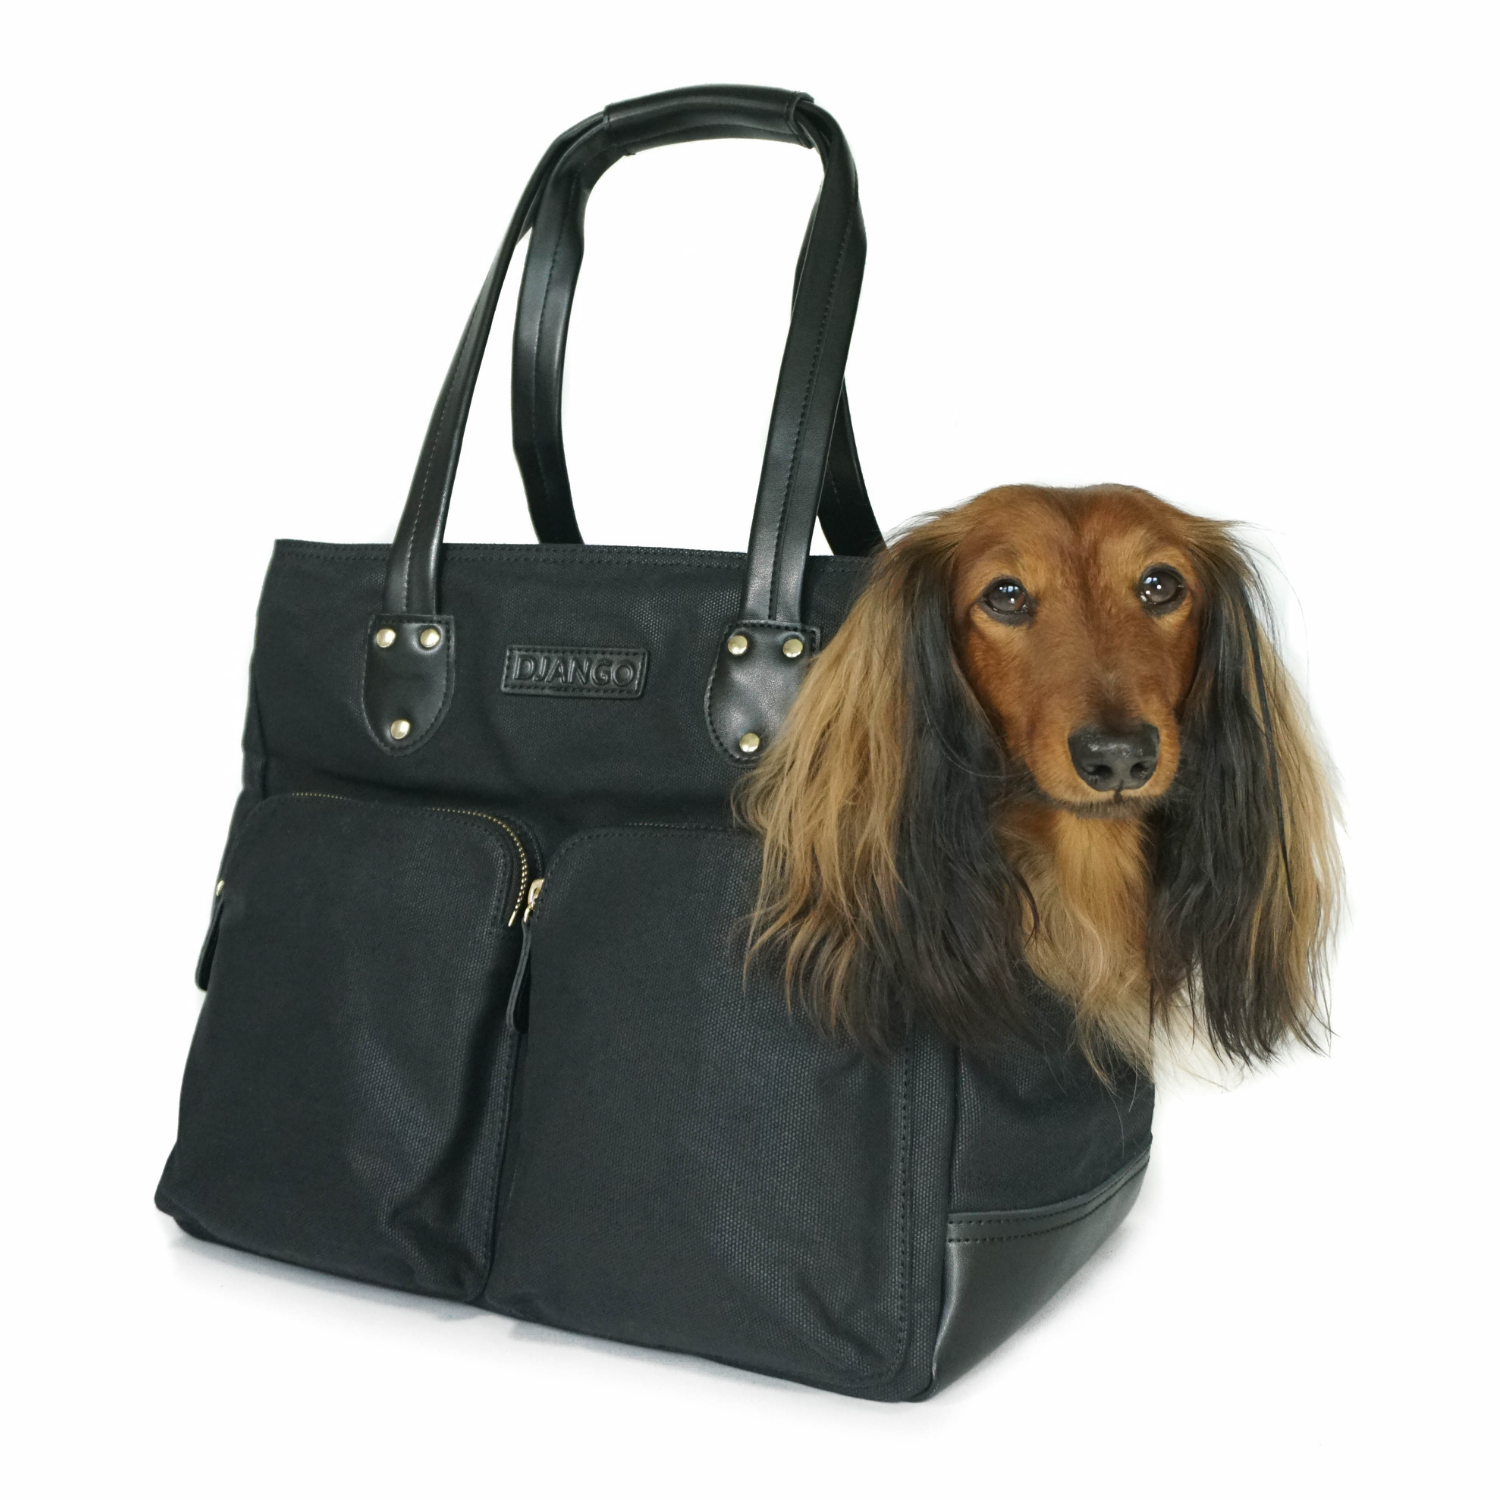 Dog Carrier Bag - Waxed Canvas & Leather Pet Travel Tote - Black - DJANGO